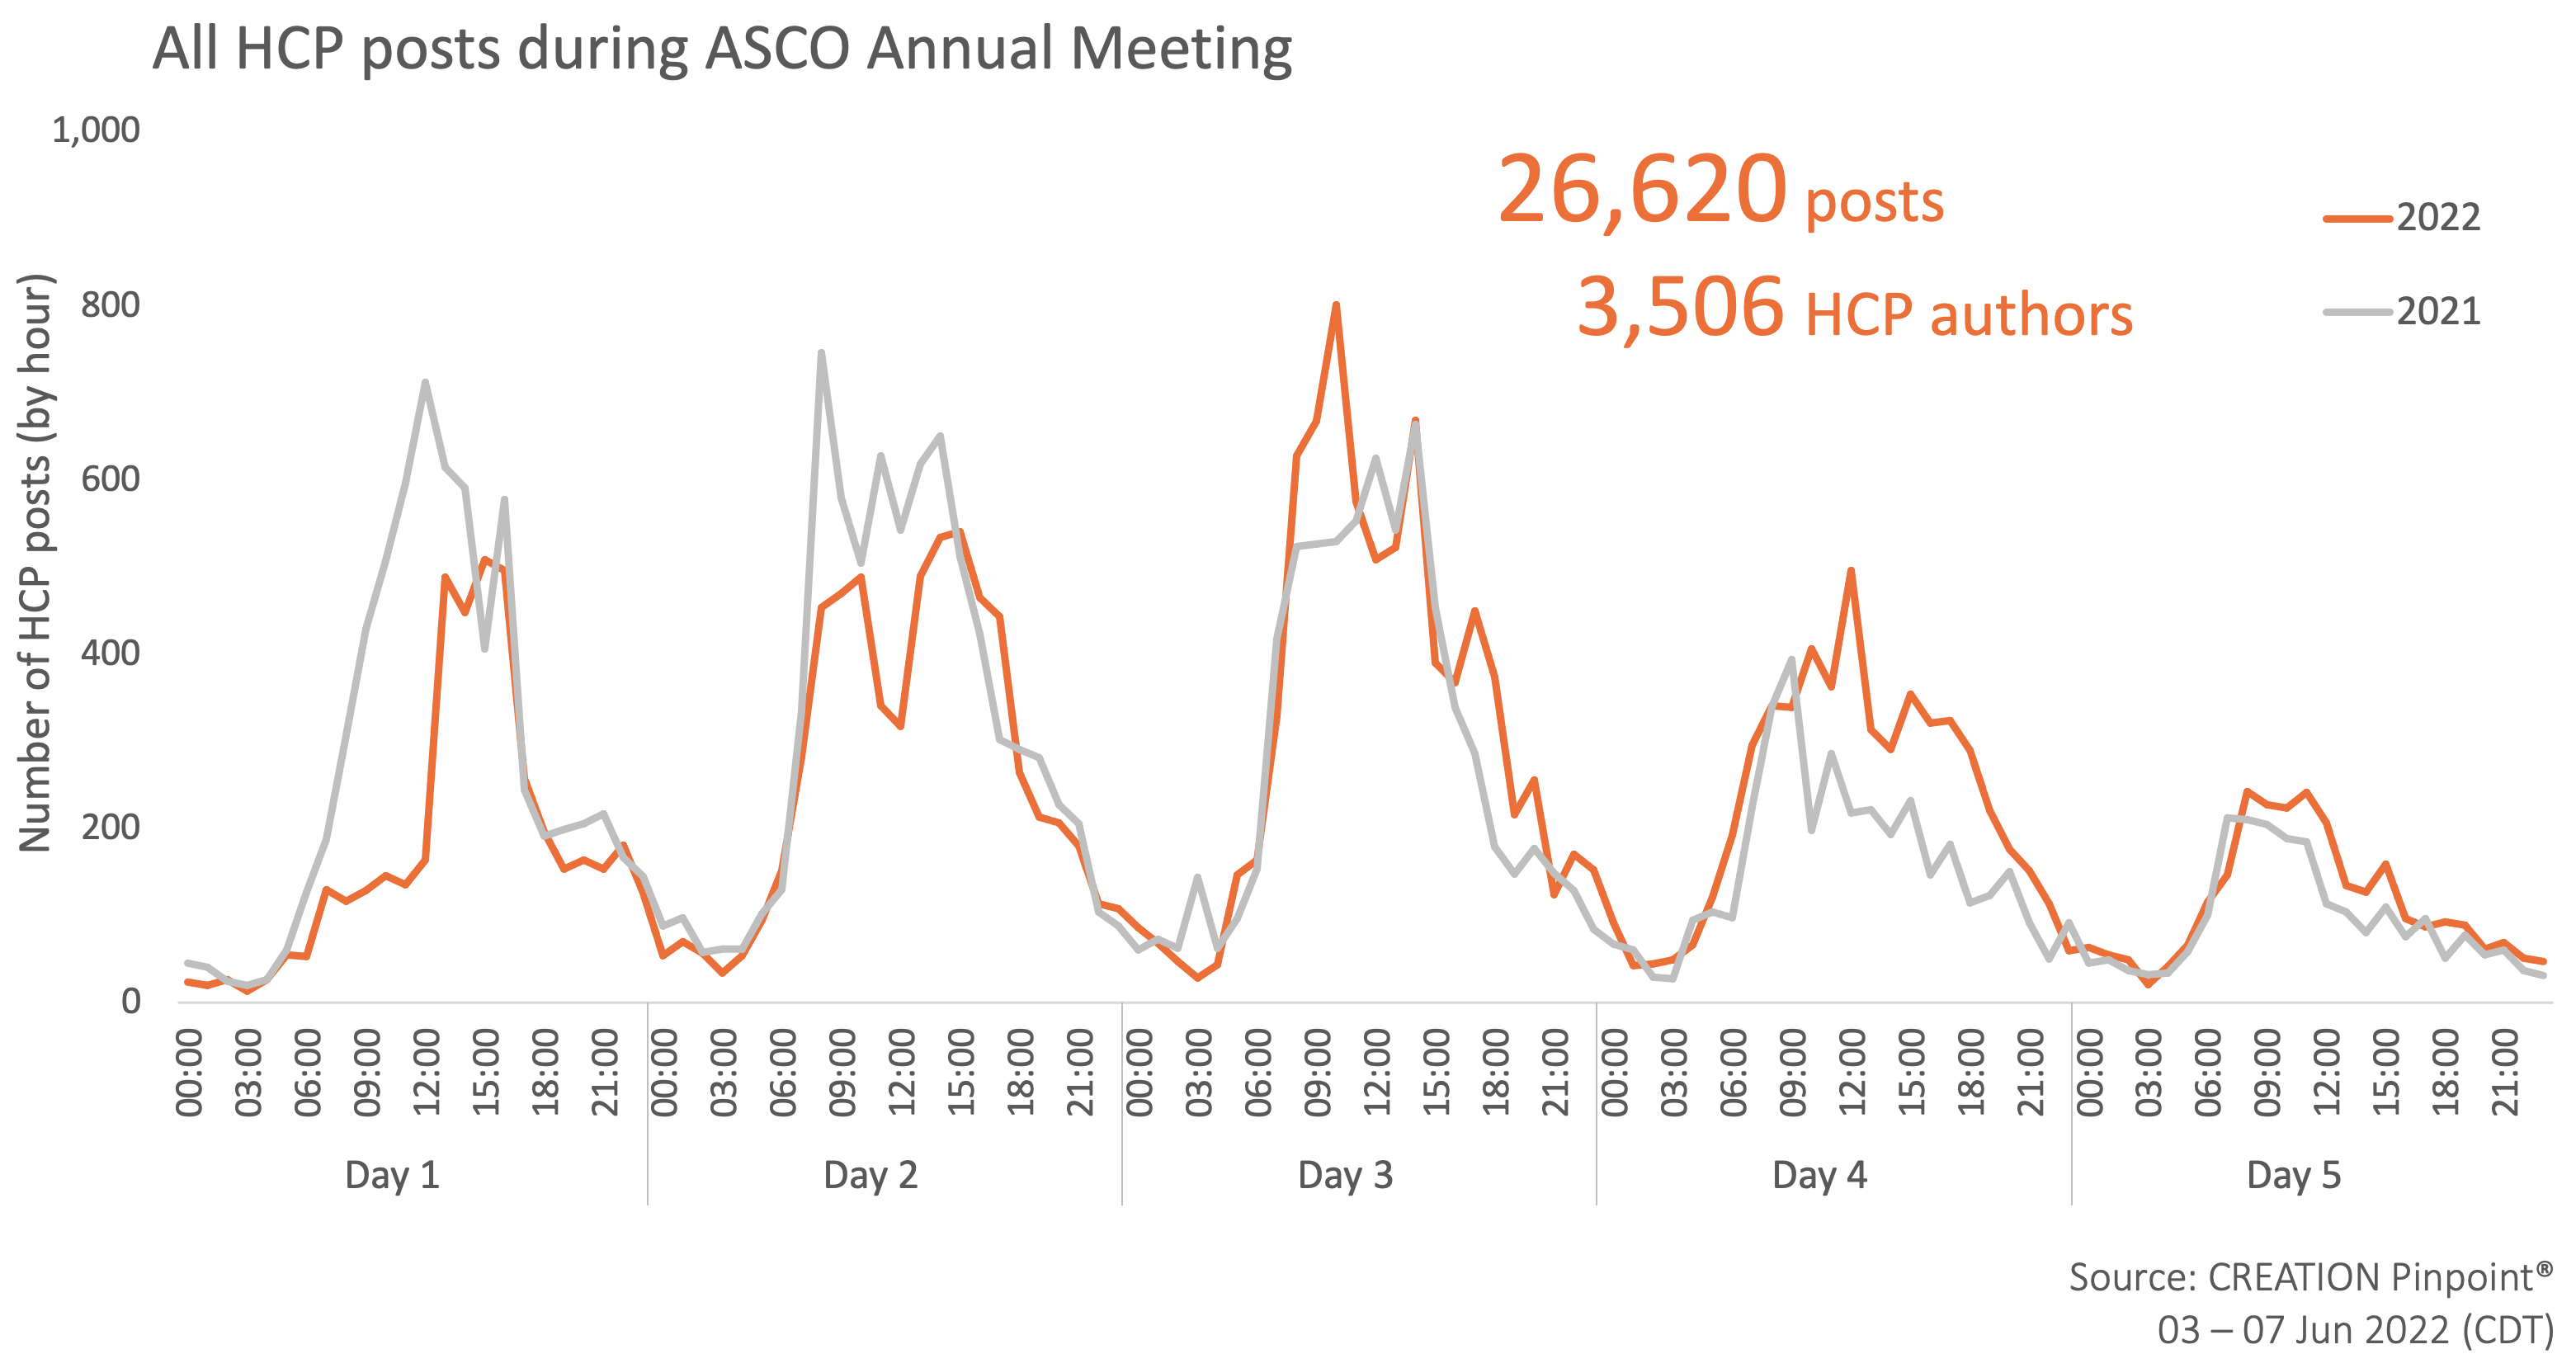 A graph showing HCP posts during ASCO Annual Meeting